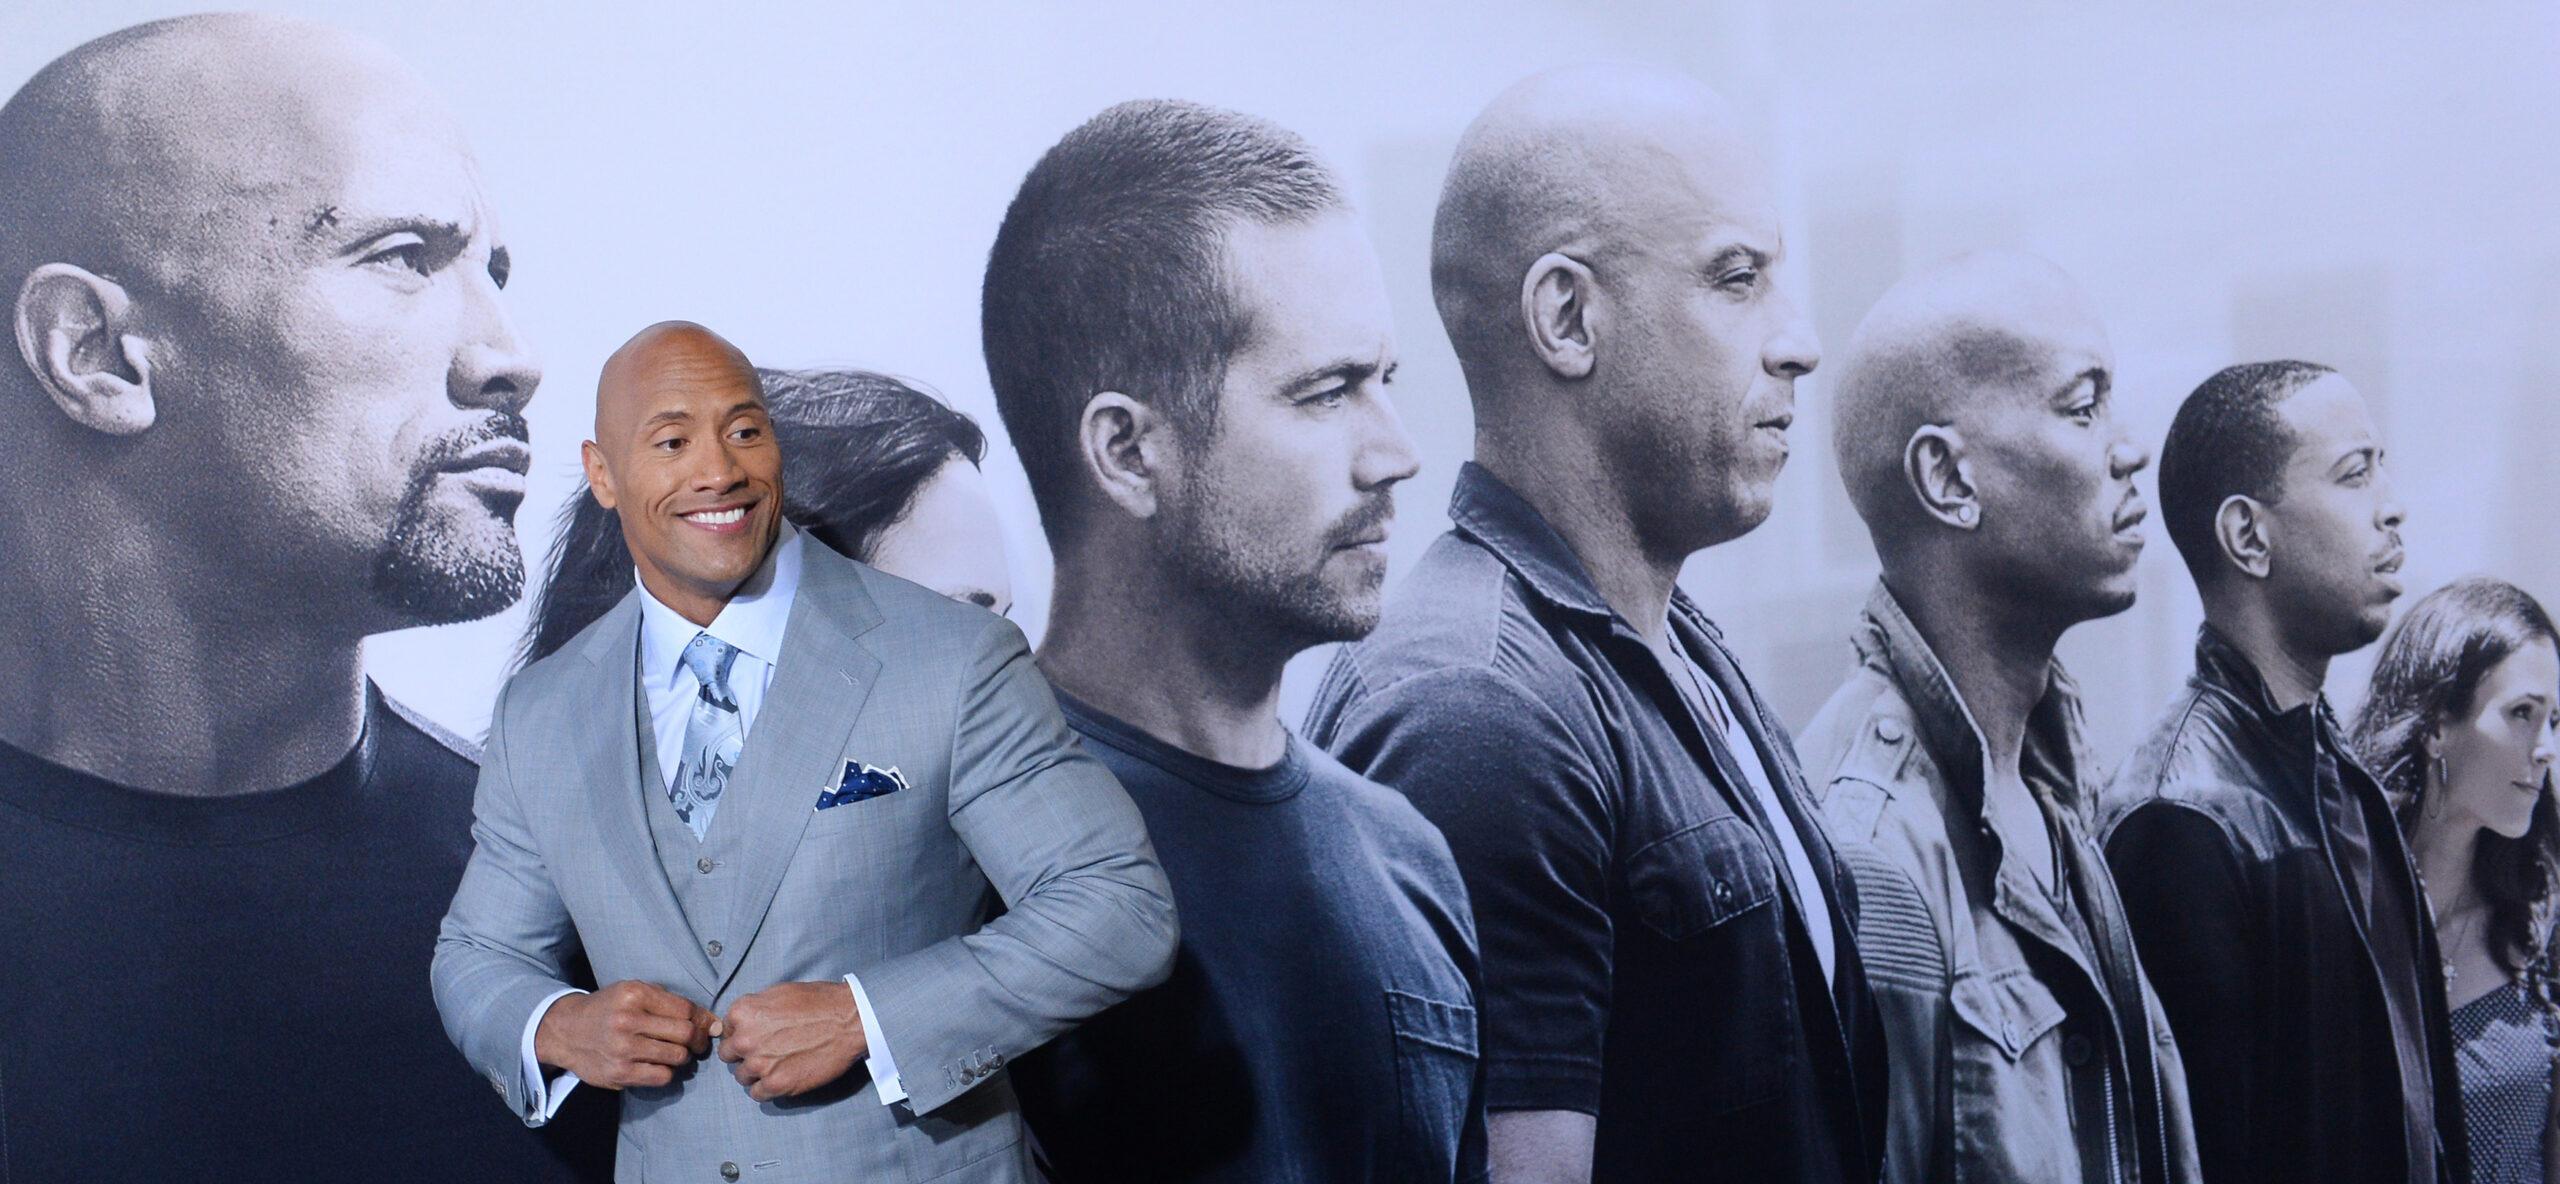 Dwayne Johnson To Return As Hobbs In ‘Fast & Furious’ Franchise After Making Peace With Vin Diesel